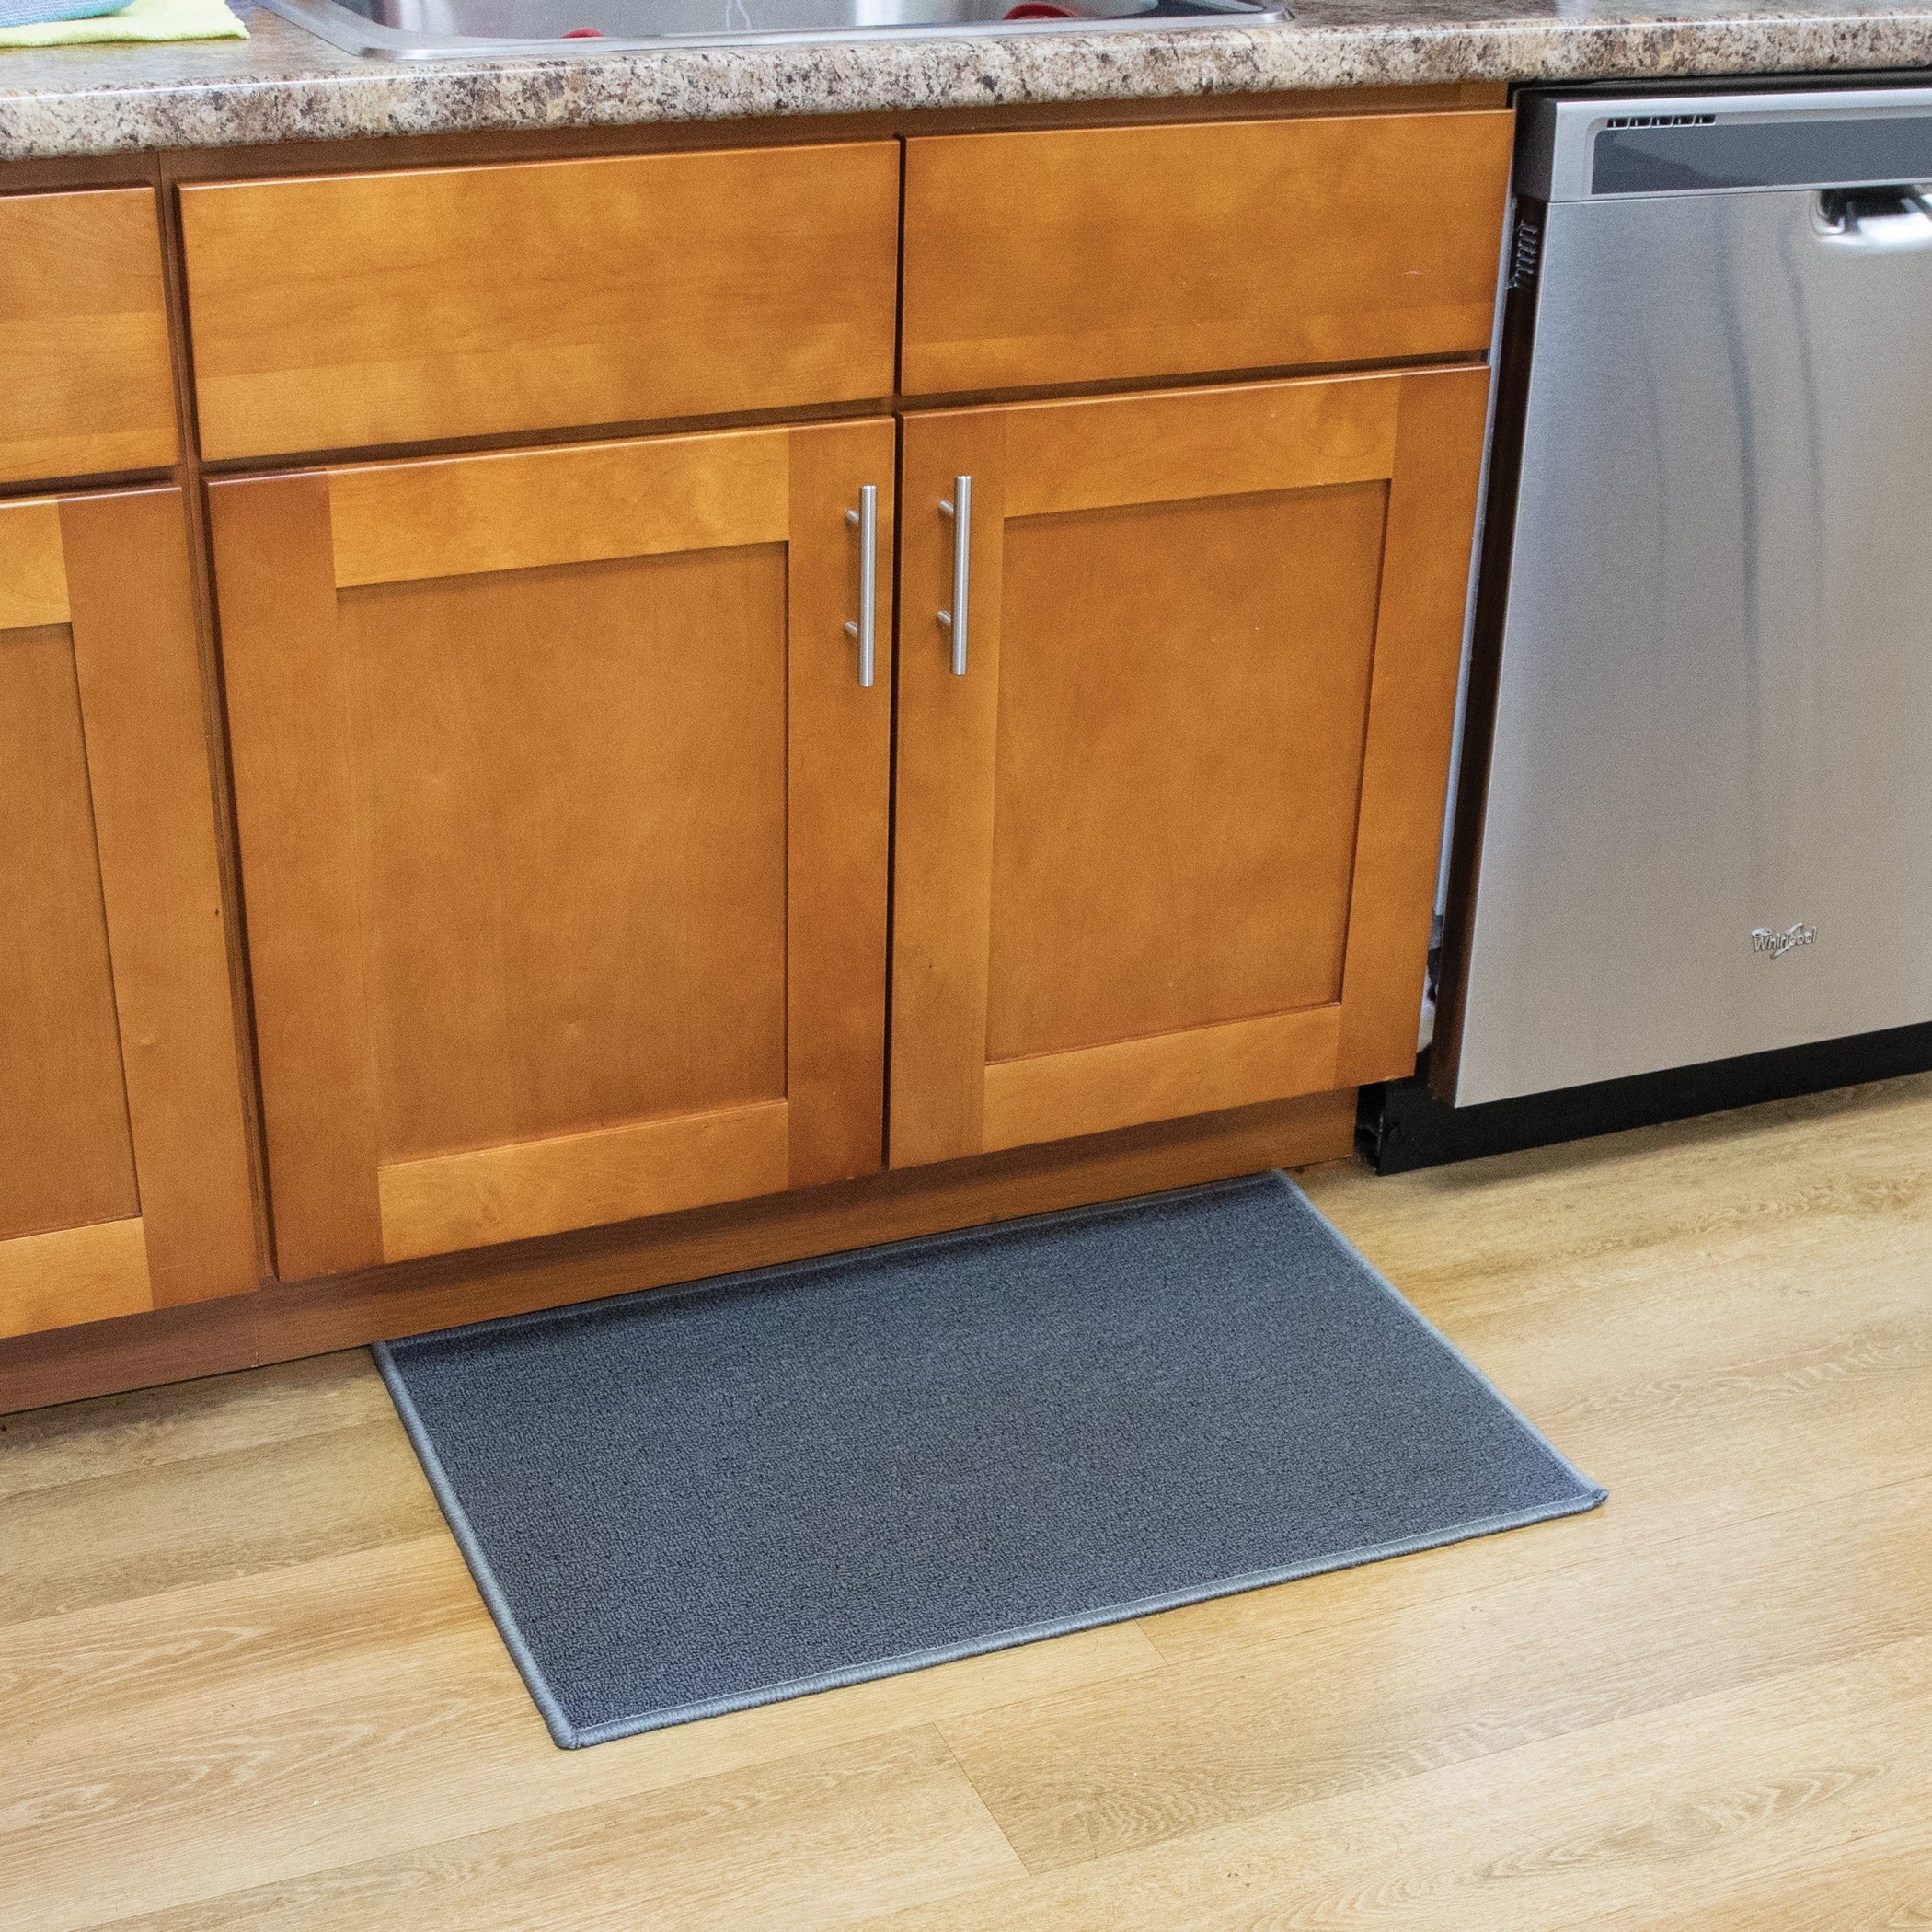 https://ak1.ostkcdn.com/images/products/is/images/direct/c32969a86eece5a7310411f4d86bf7a4b4836ff0/The-Sloppy-Chef-Solid-Skid-Resistant-Kitchen-Rug.jpg